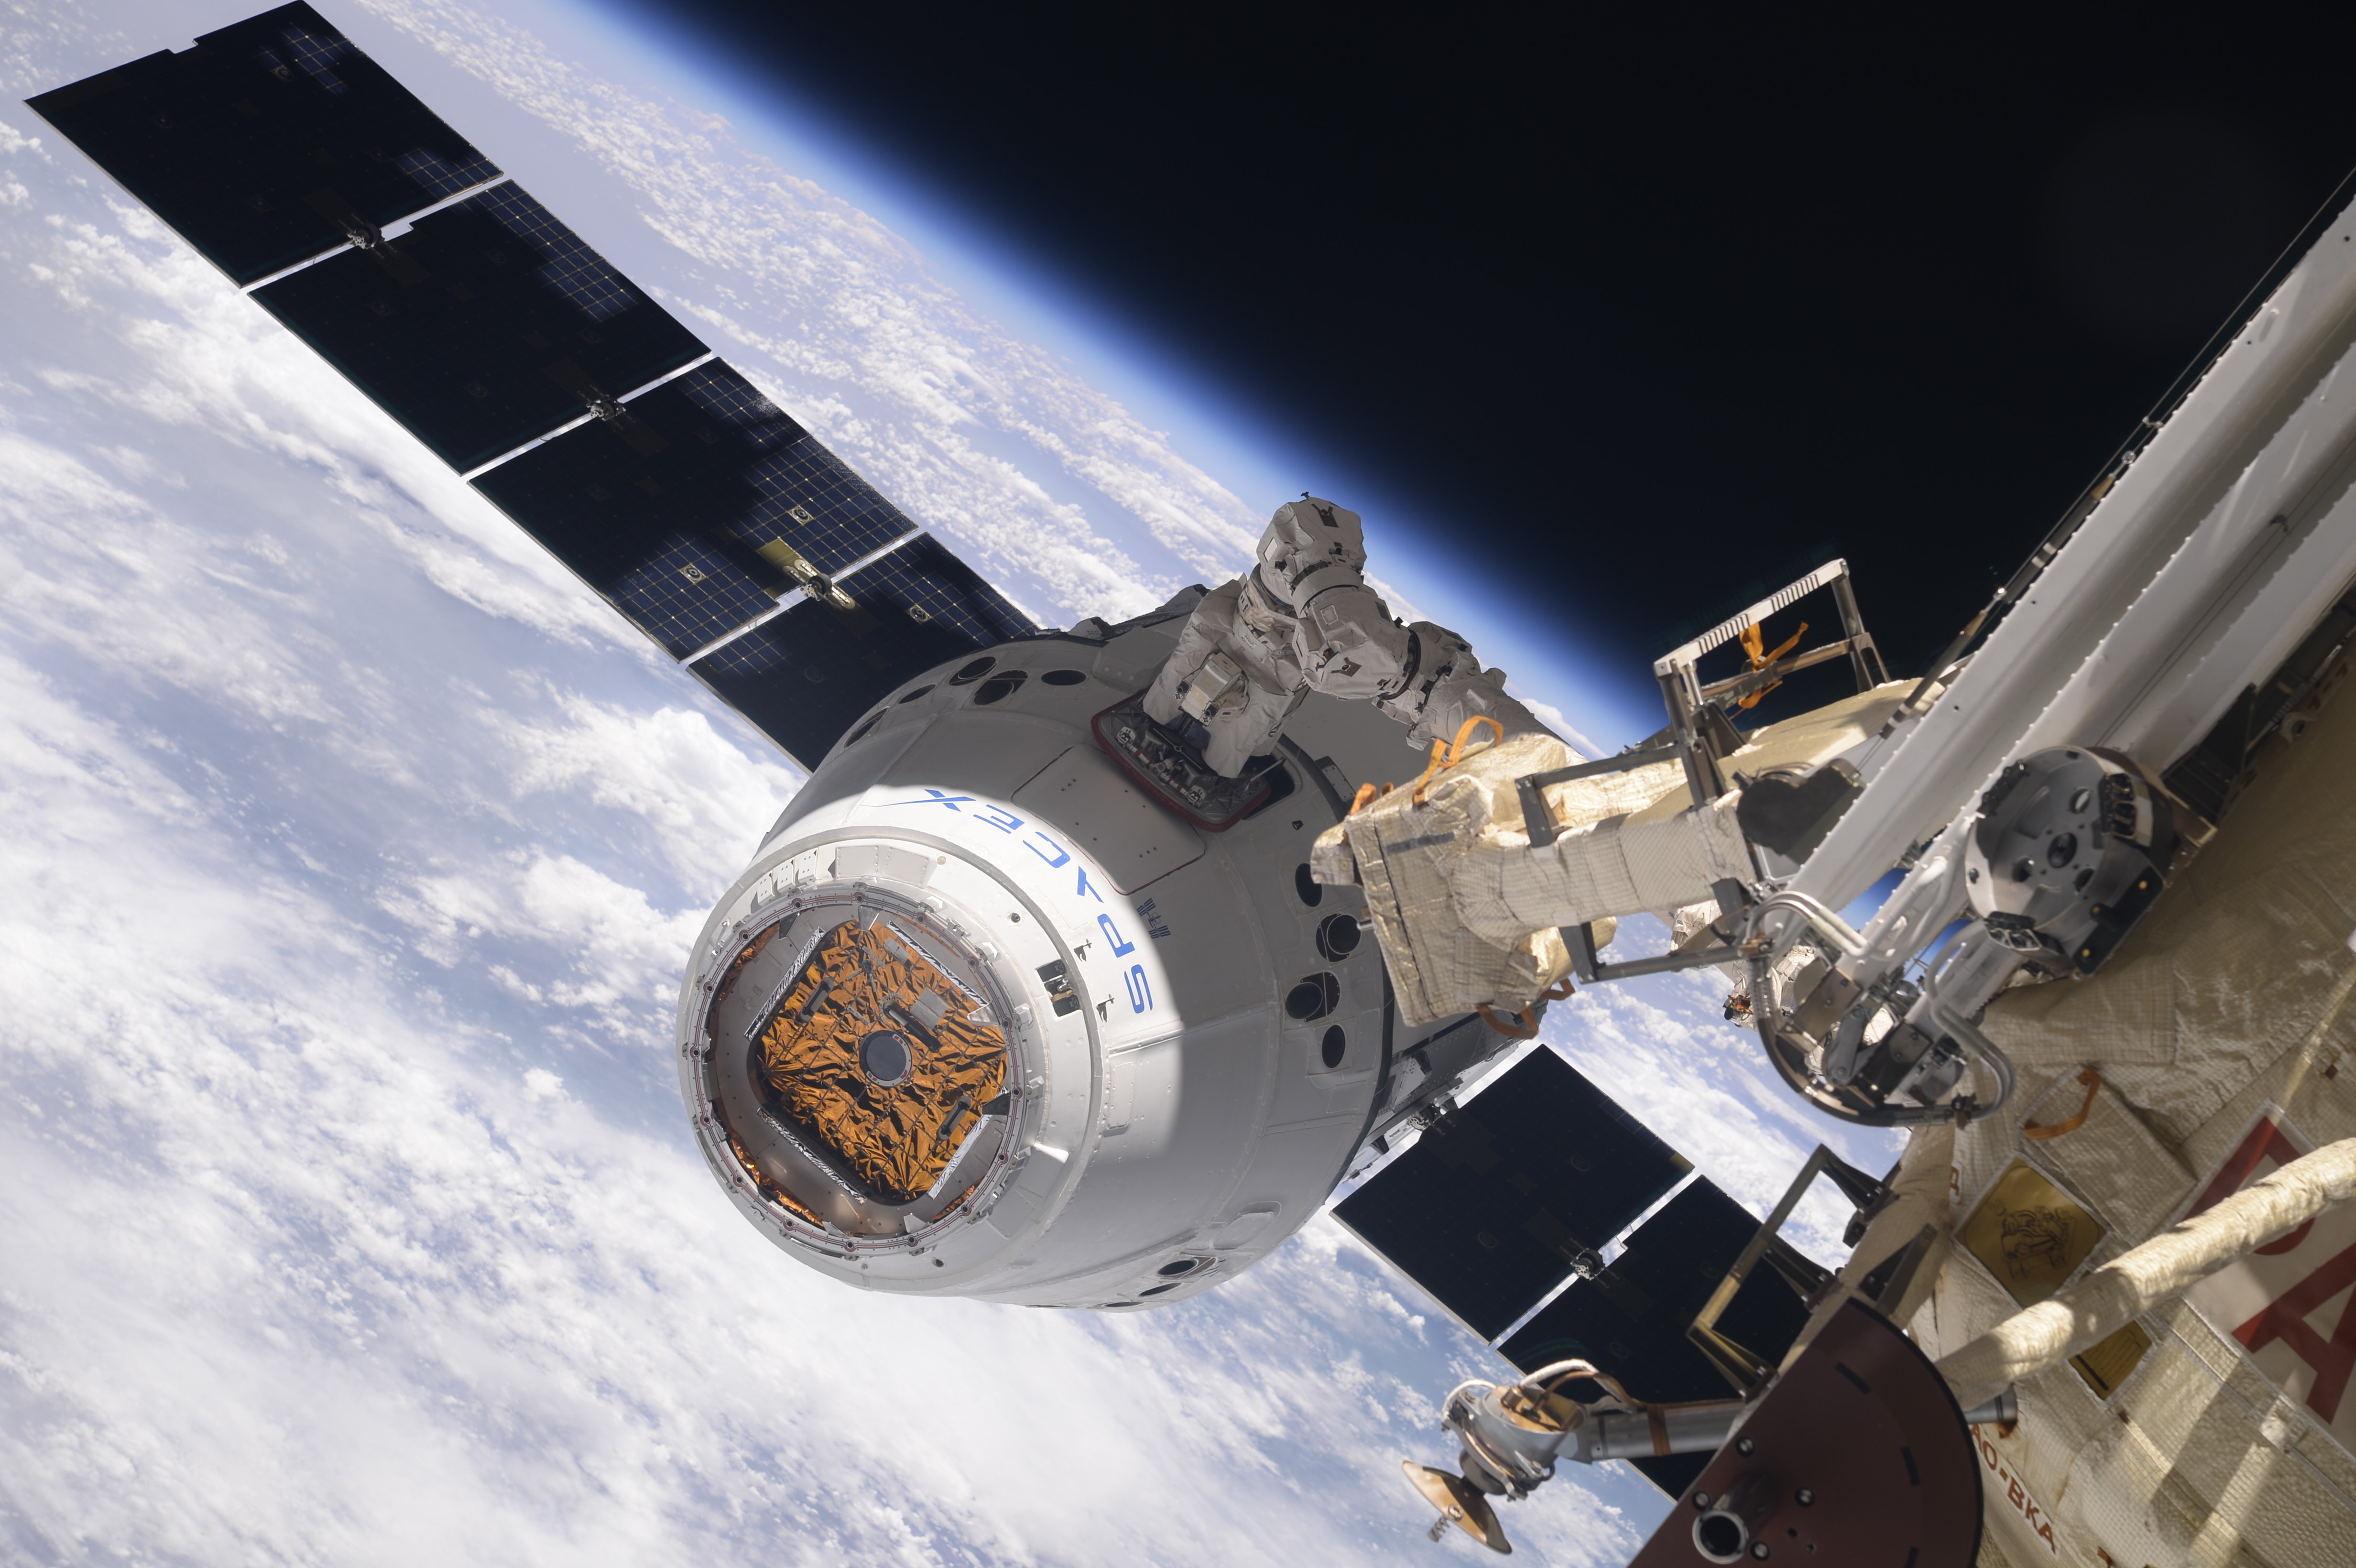 Dragon CRS-14 Arrives at ISS after Textbook Rendezvous for Critical Science Delivery